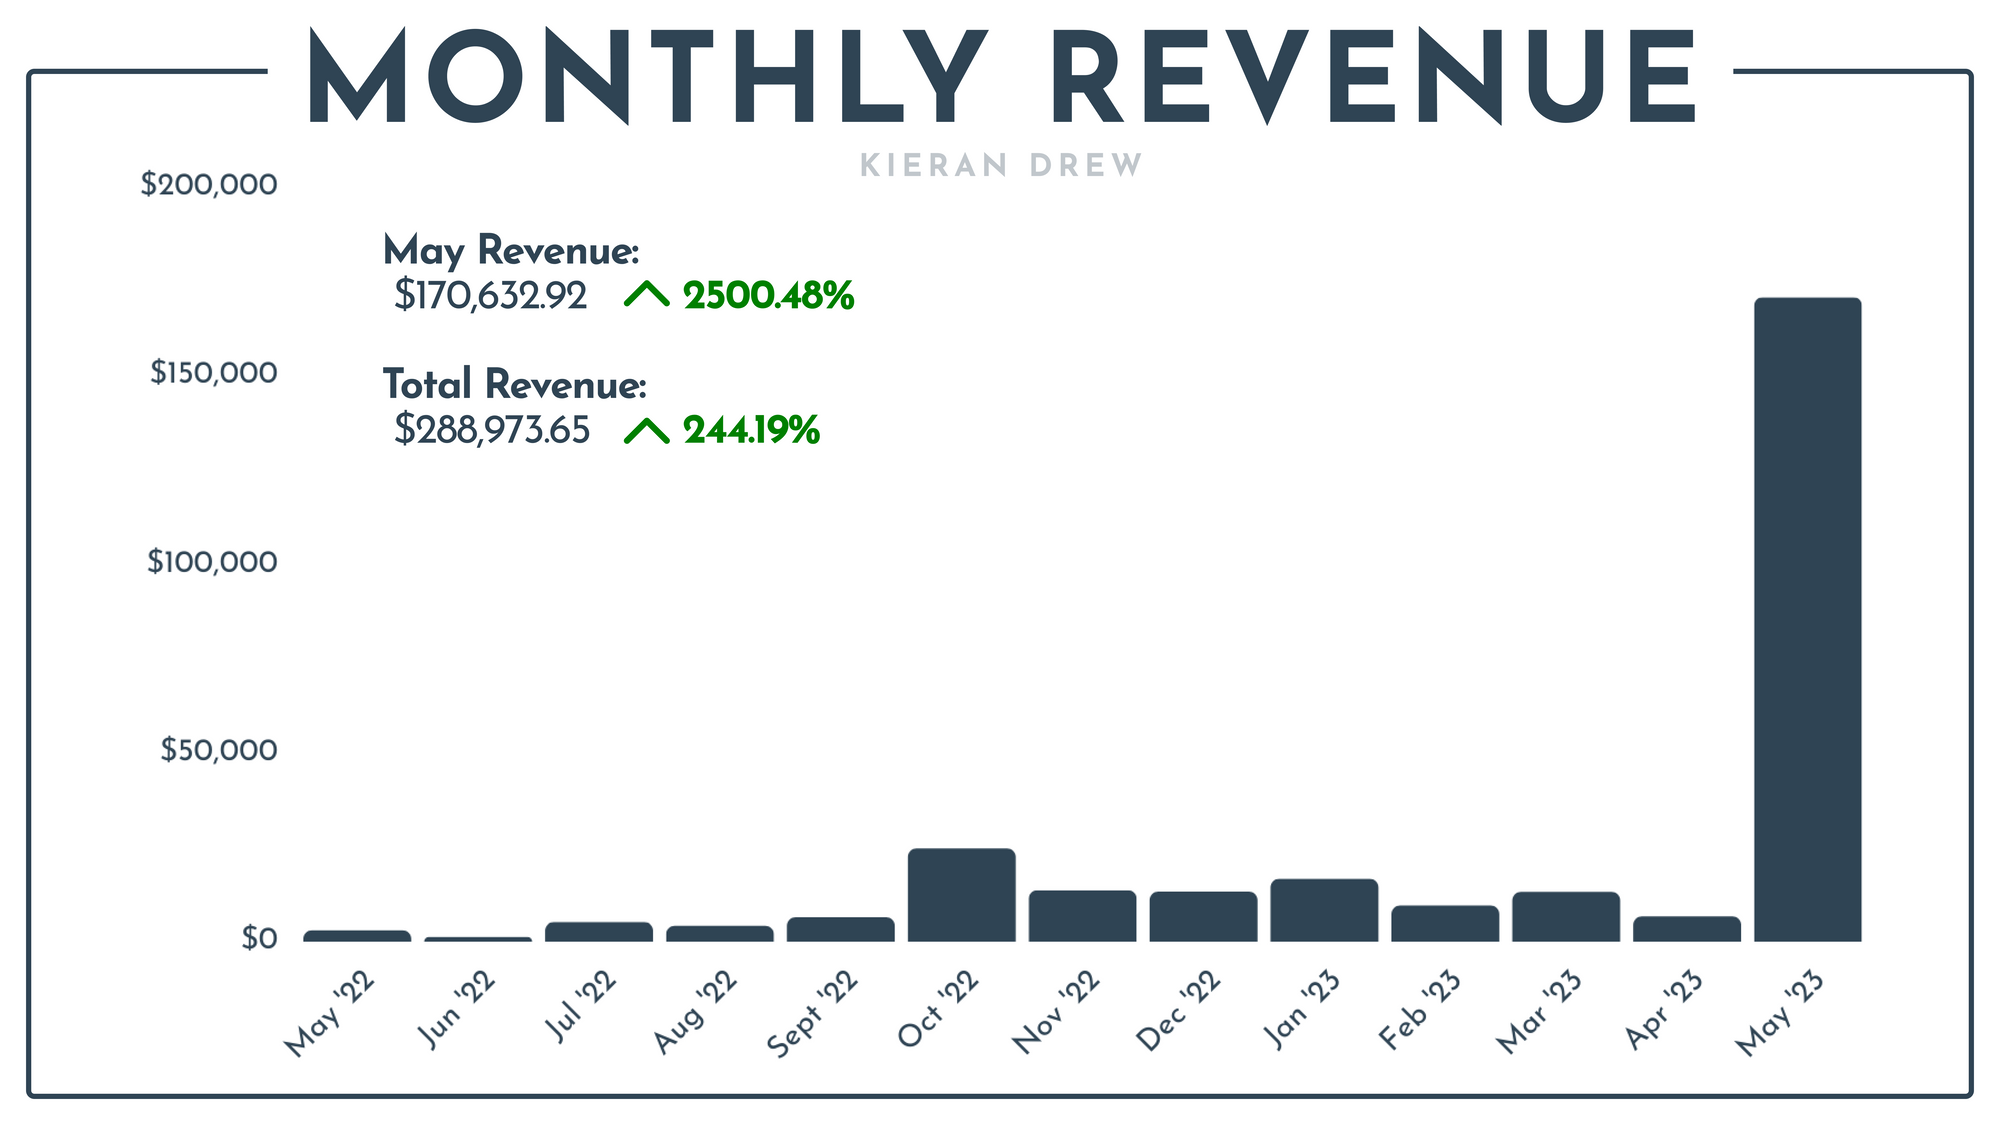 MONTHLY REVENUE BAR CHART